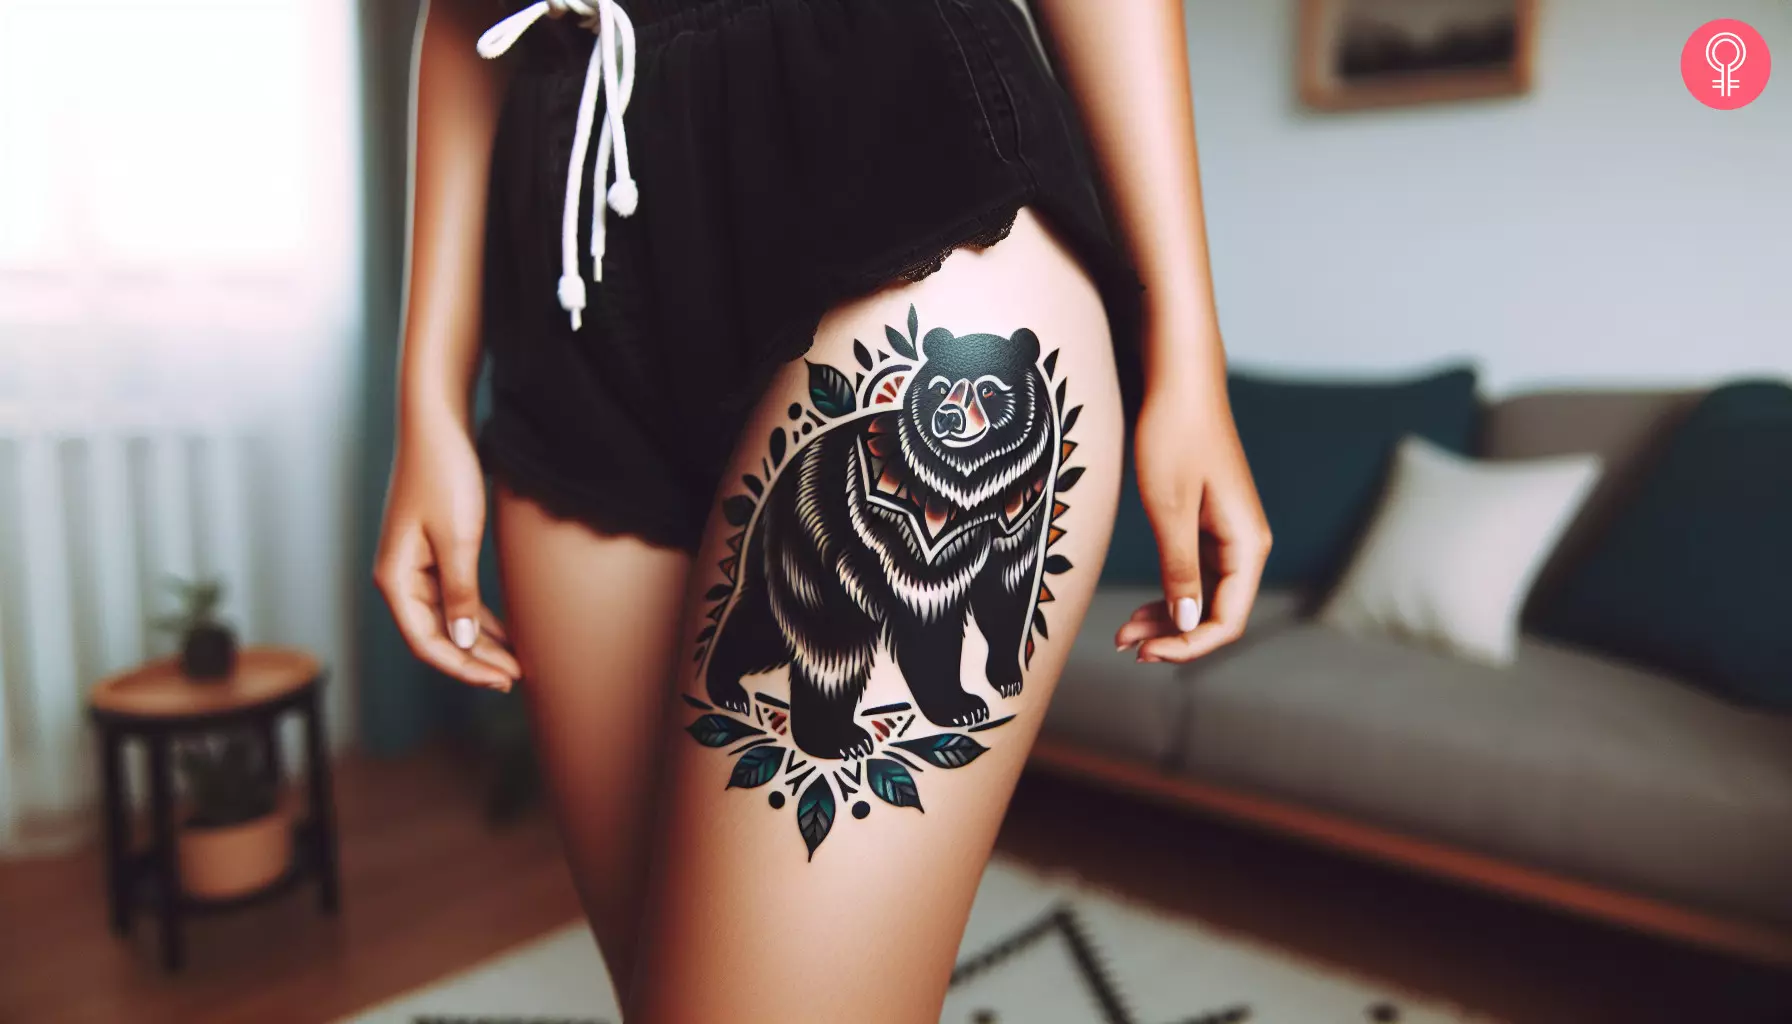 A black and white bear tattoo on the thigh